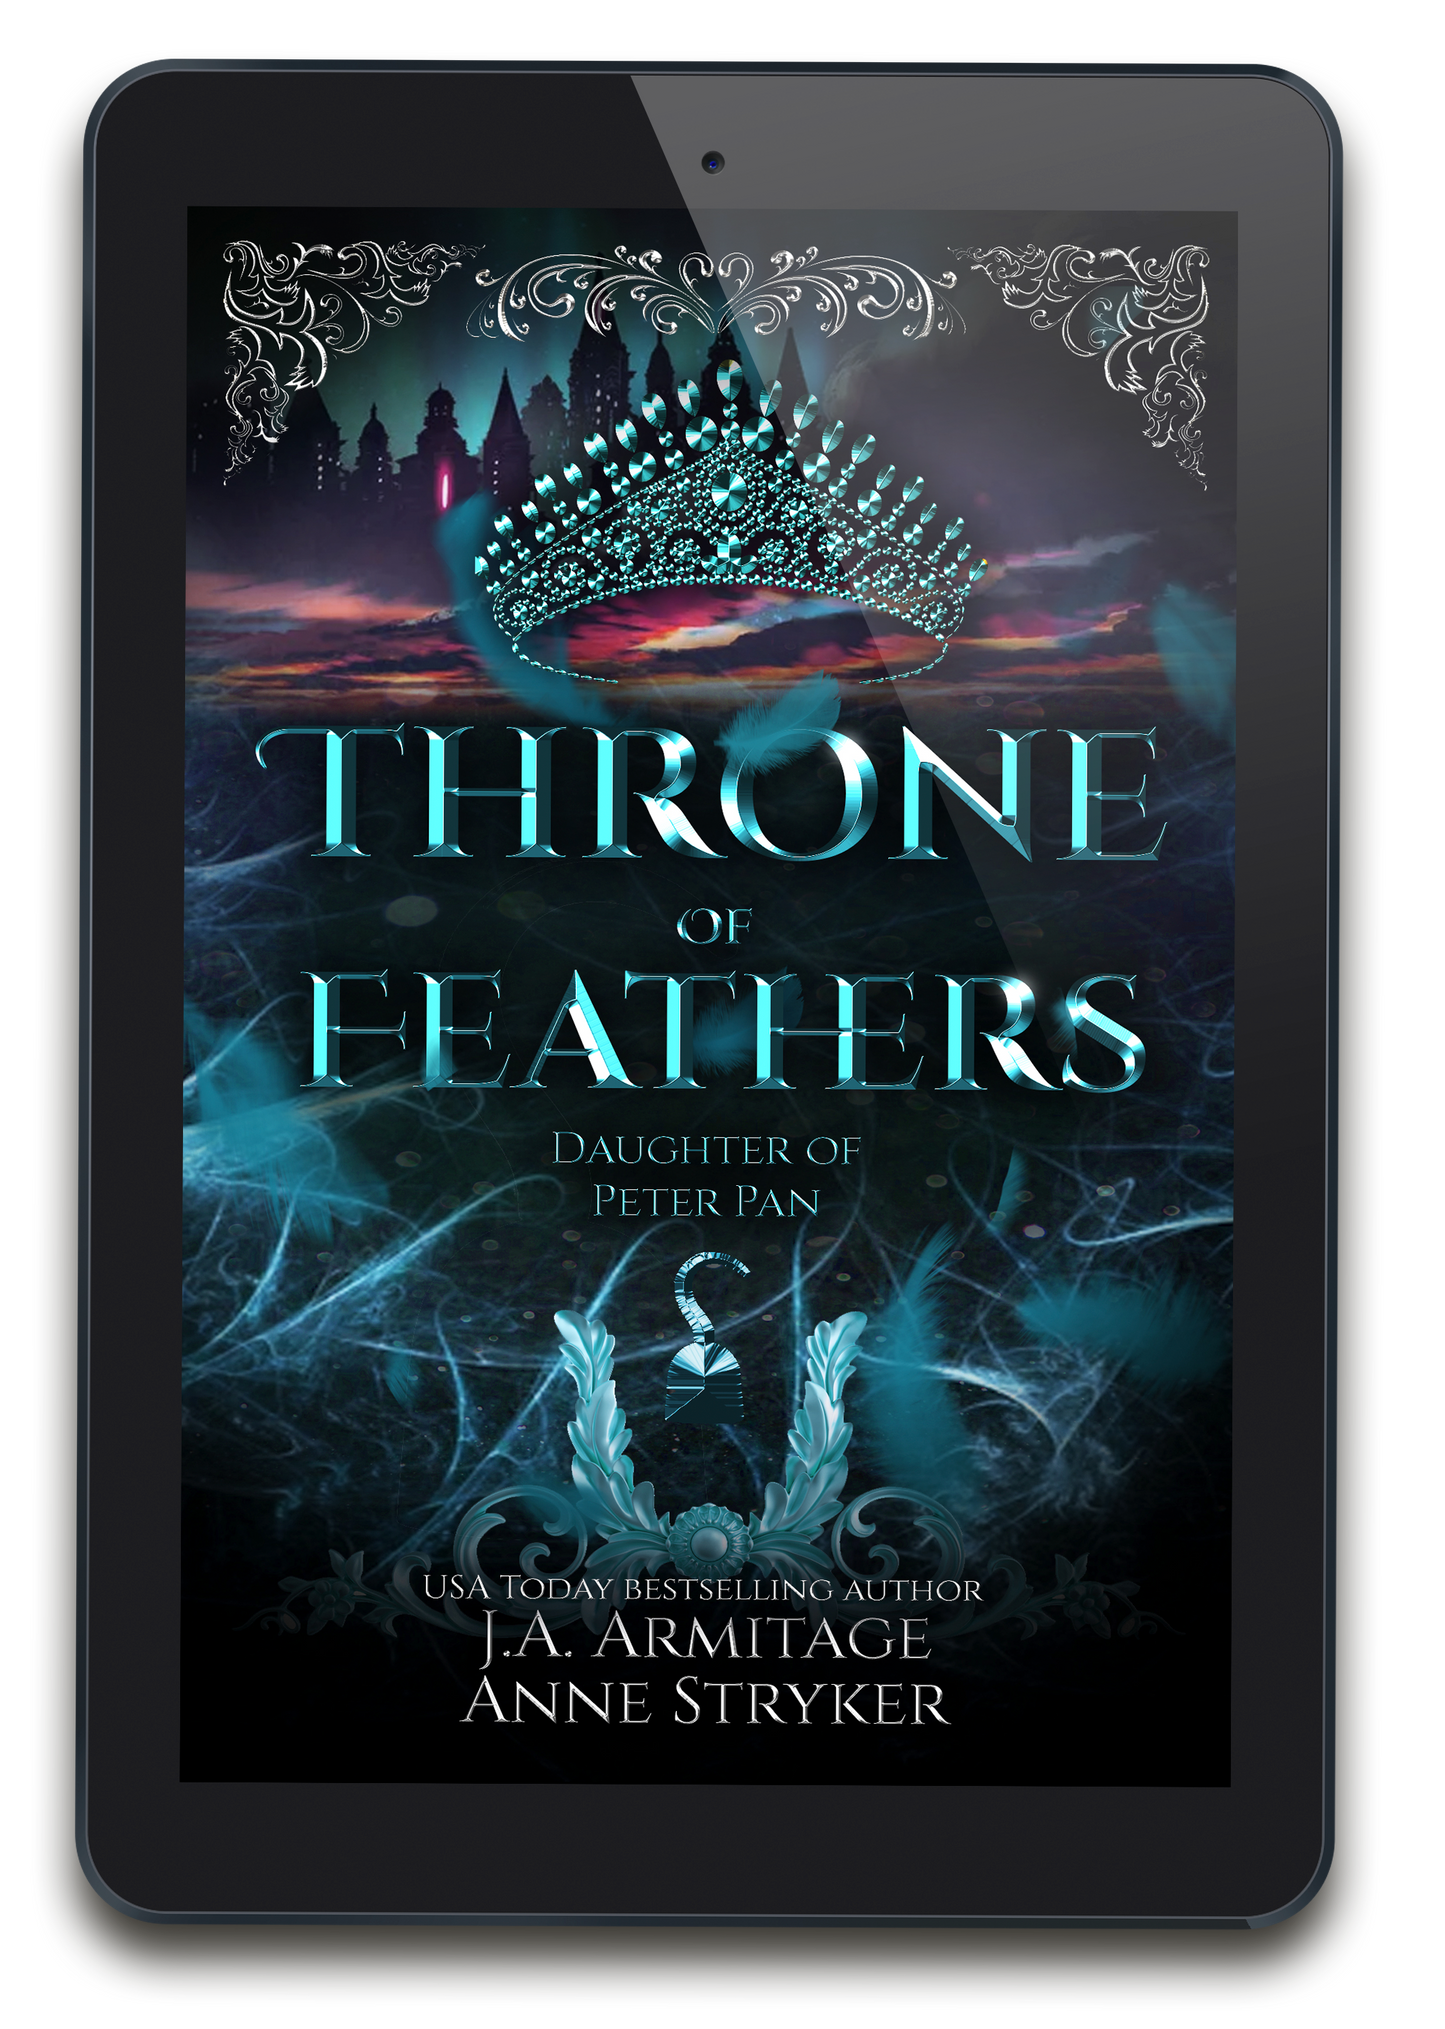 THRONE OF FEATHERS (Daughter of Peter Pan) eBOOK